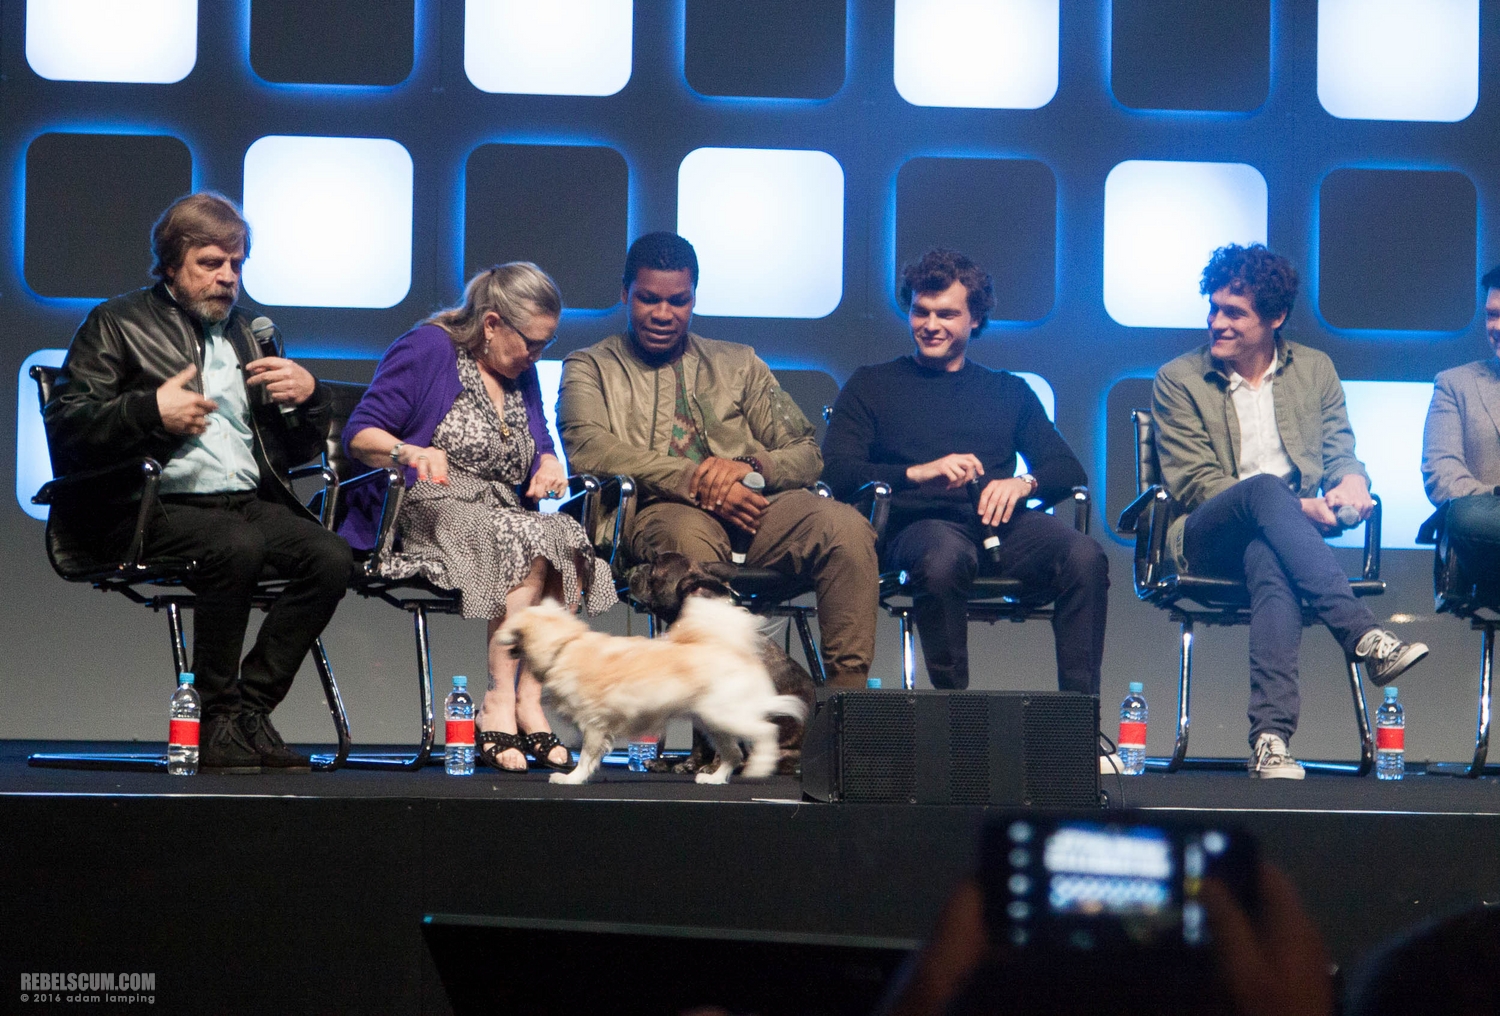 star-wars-celebration-2016-future-filmmakers-and-closing-ceremony-024.jpg